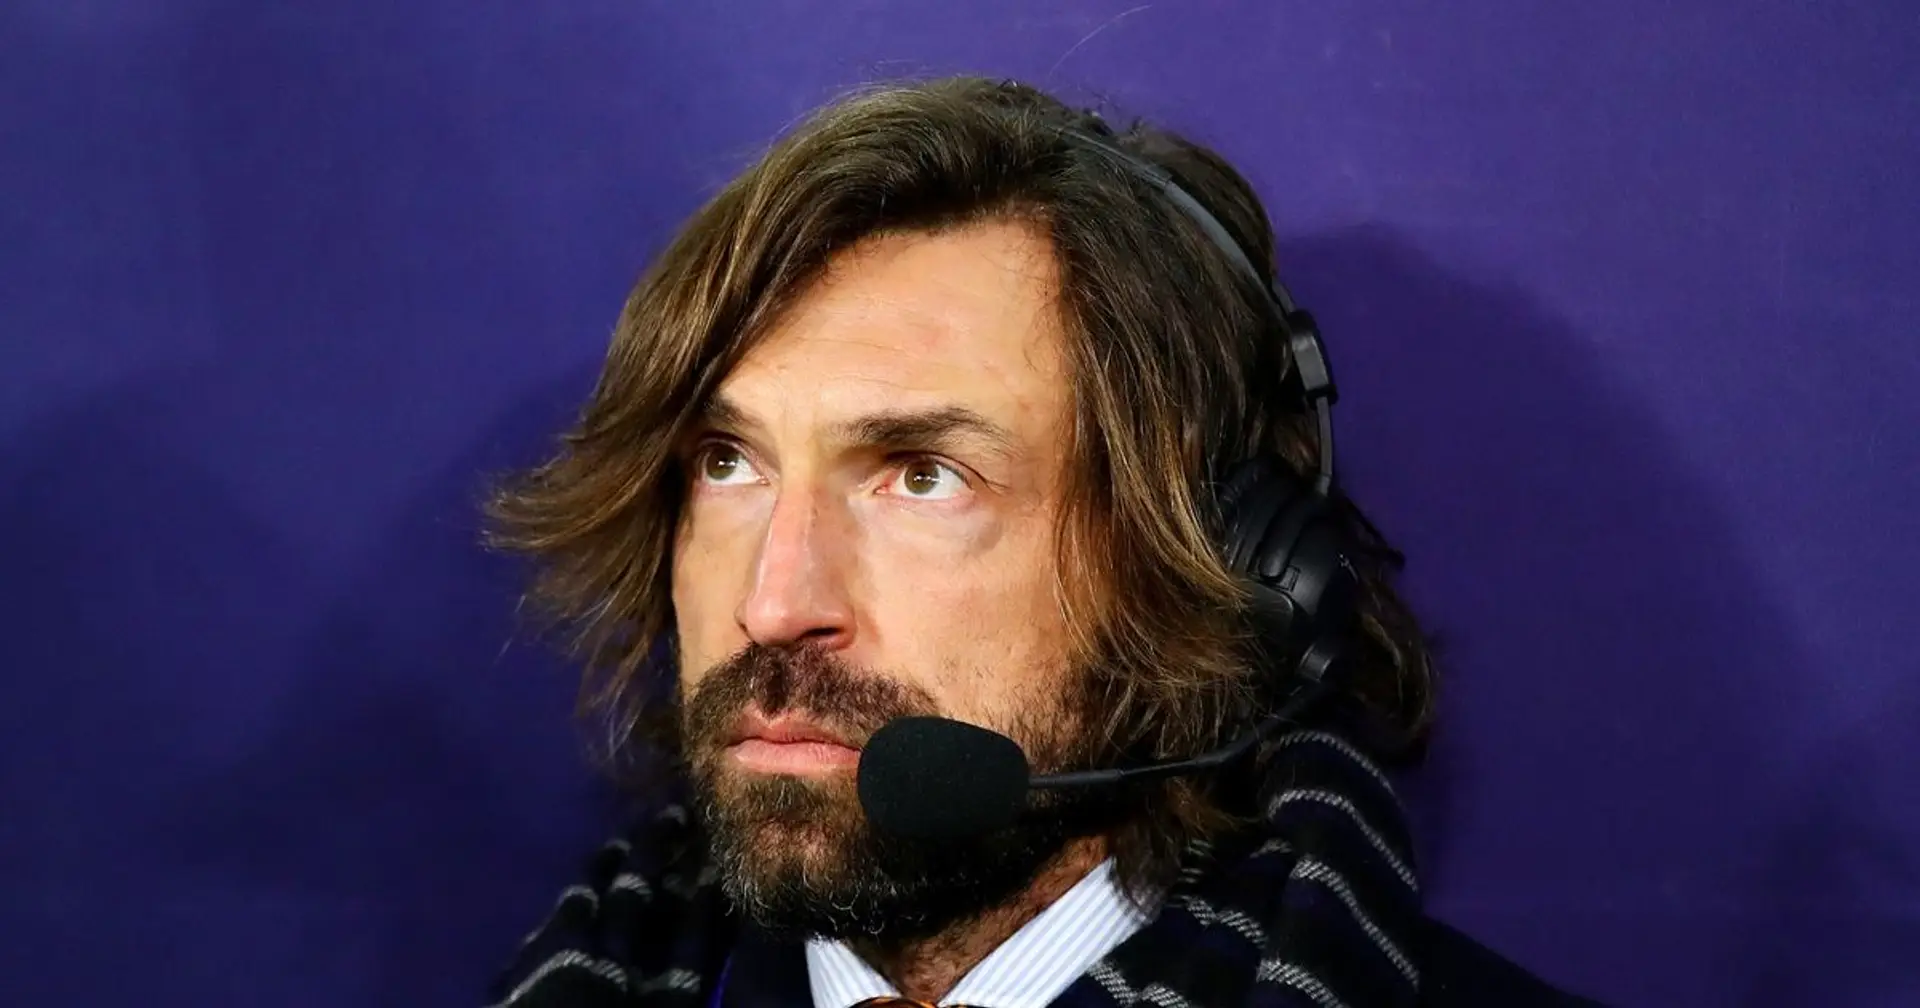 'Who knows what's happens in the future': Andrea Pirlo's agent responds to Barcelona rumours